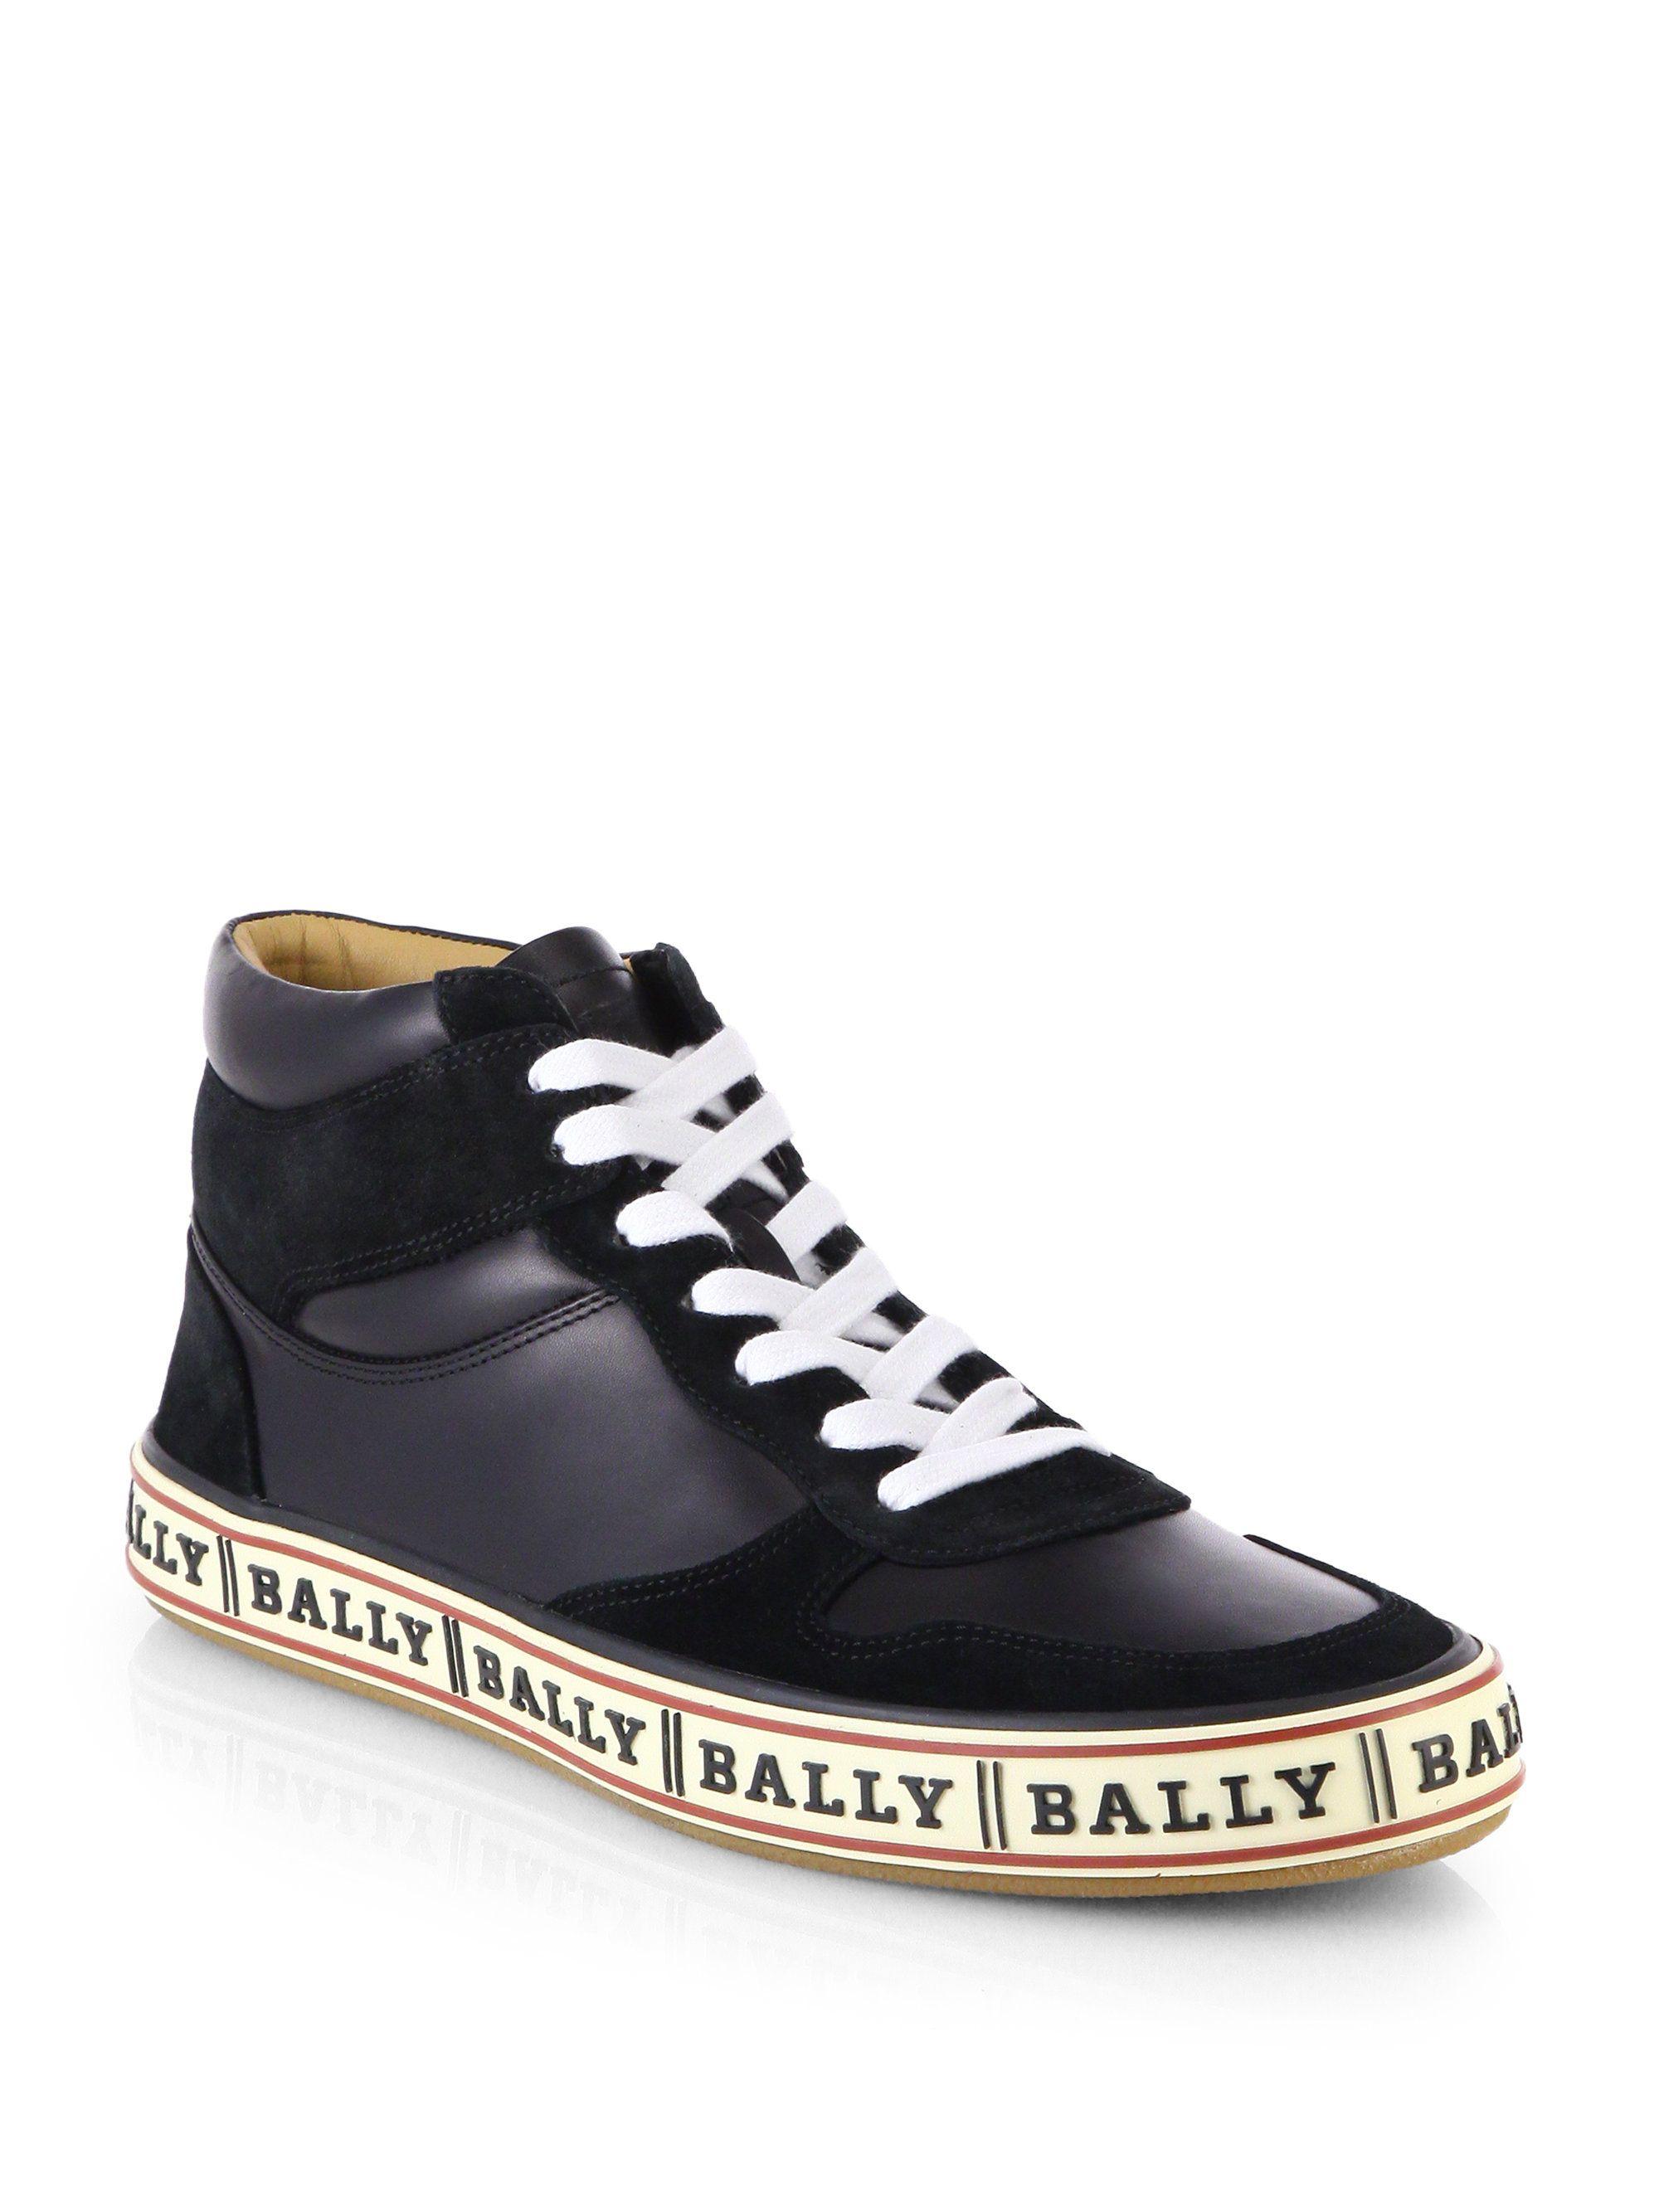 Bally Shoes Logo - Lyst - Bally Logo-soled Leather High-top Sneakers in Black for Men